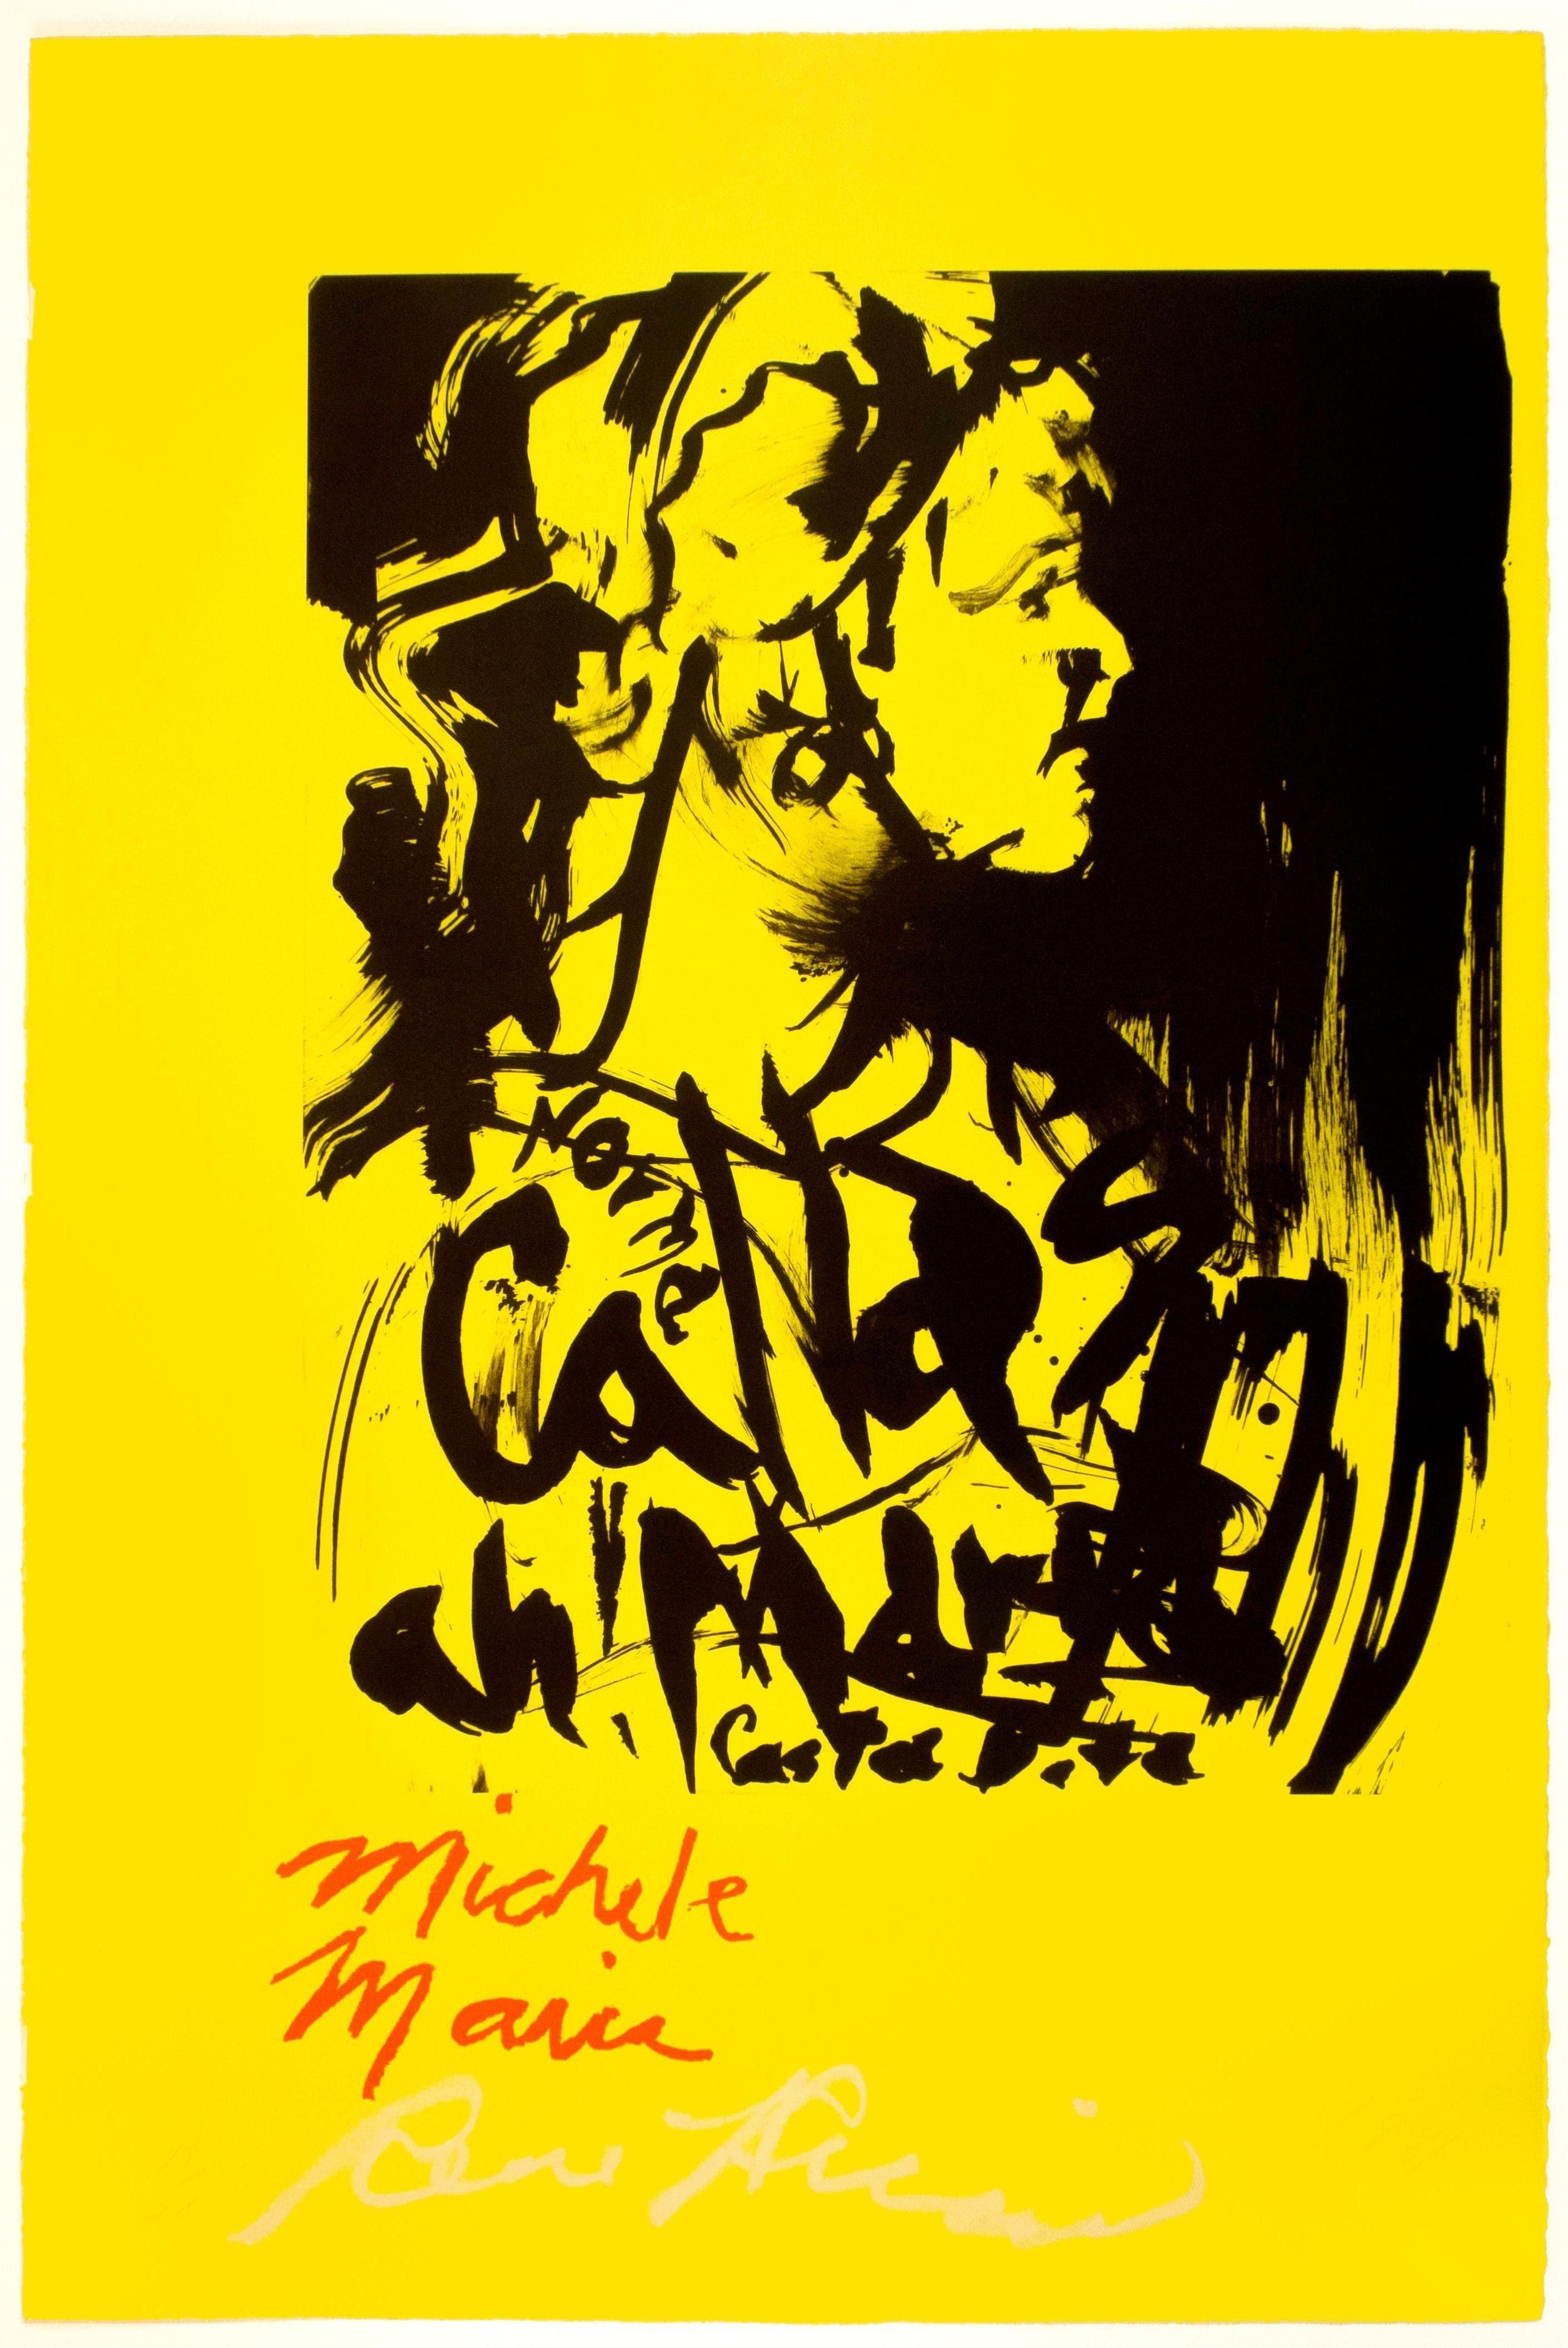 Rene Ricard Print - Michele Maria: bright yellow red Maria Callas opera artist portrait with poetry 